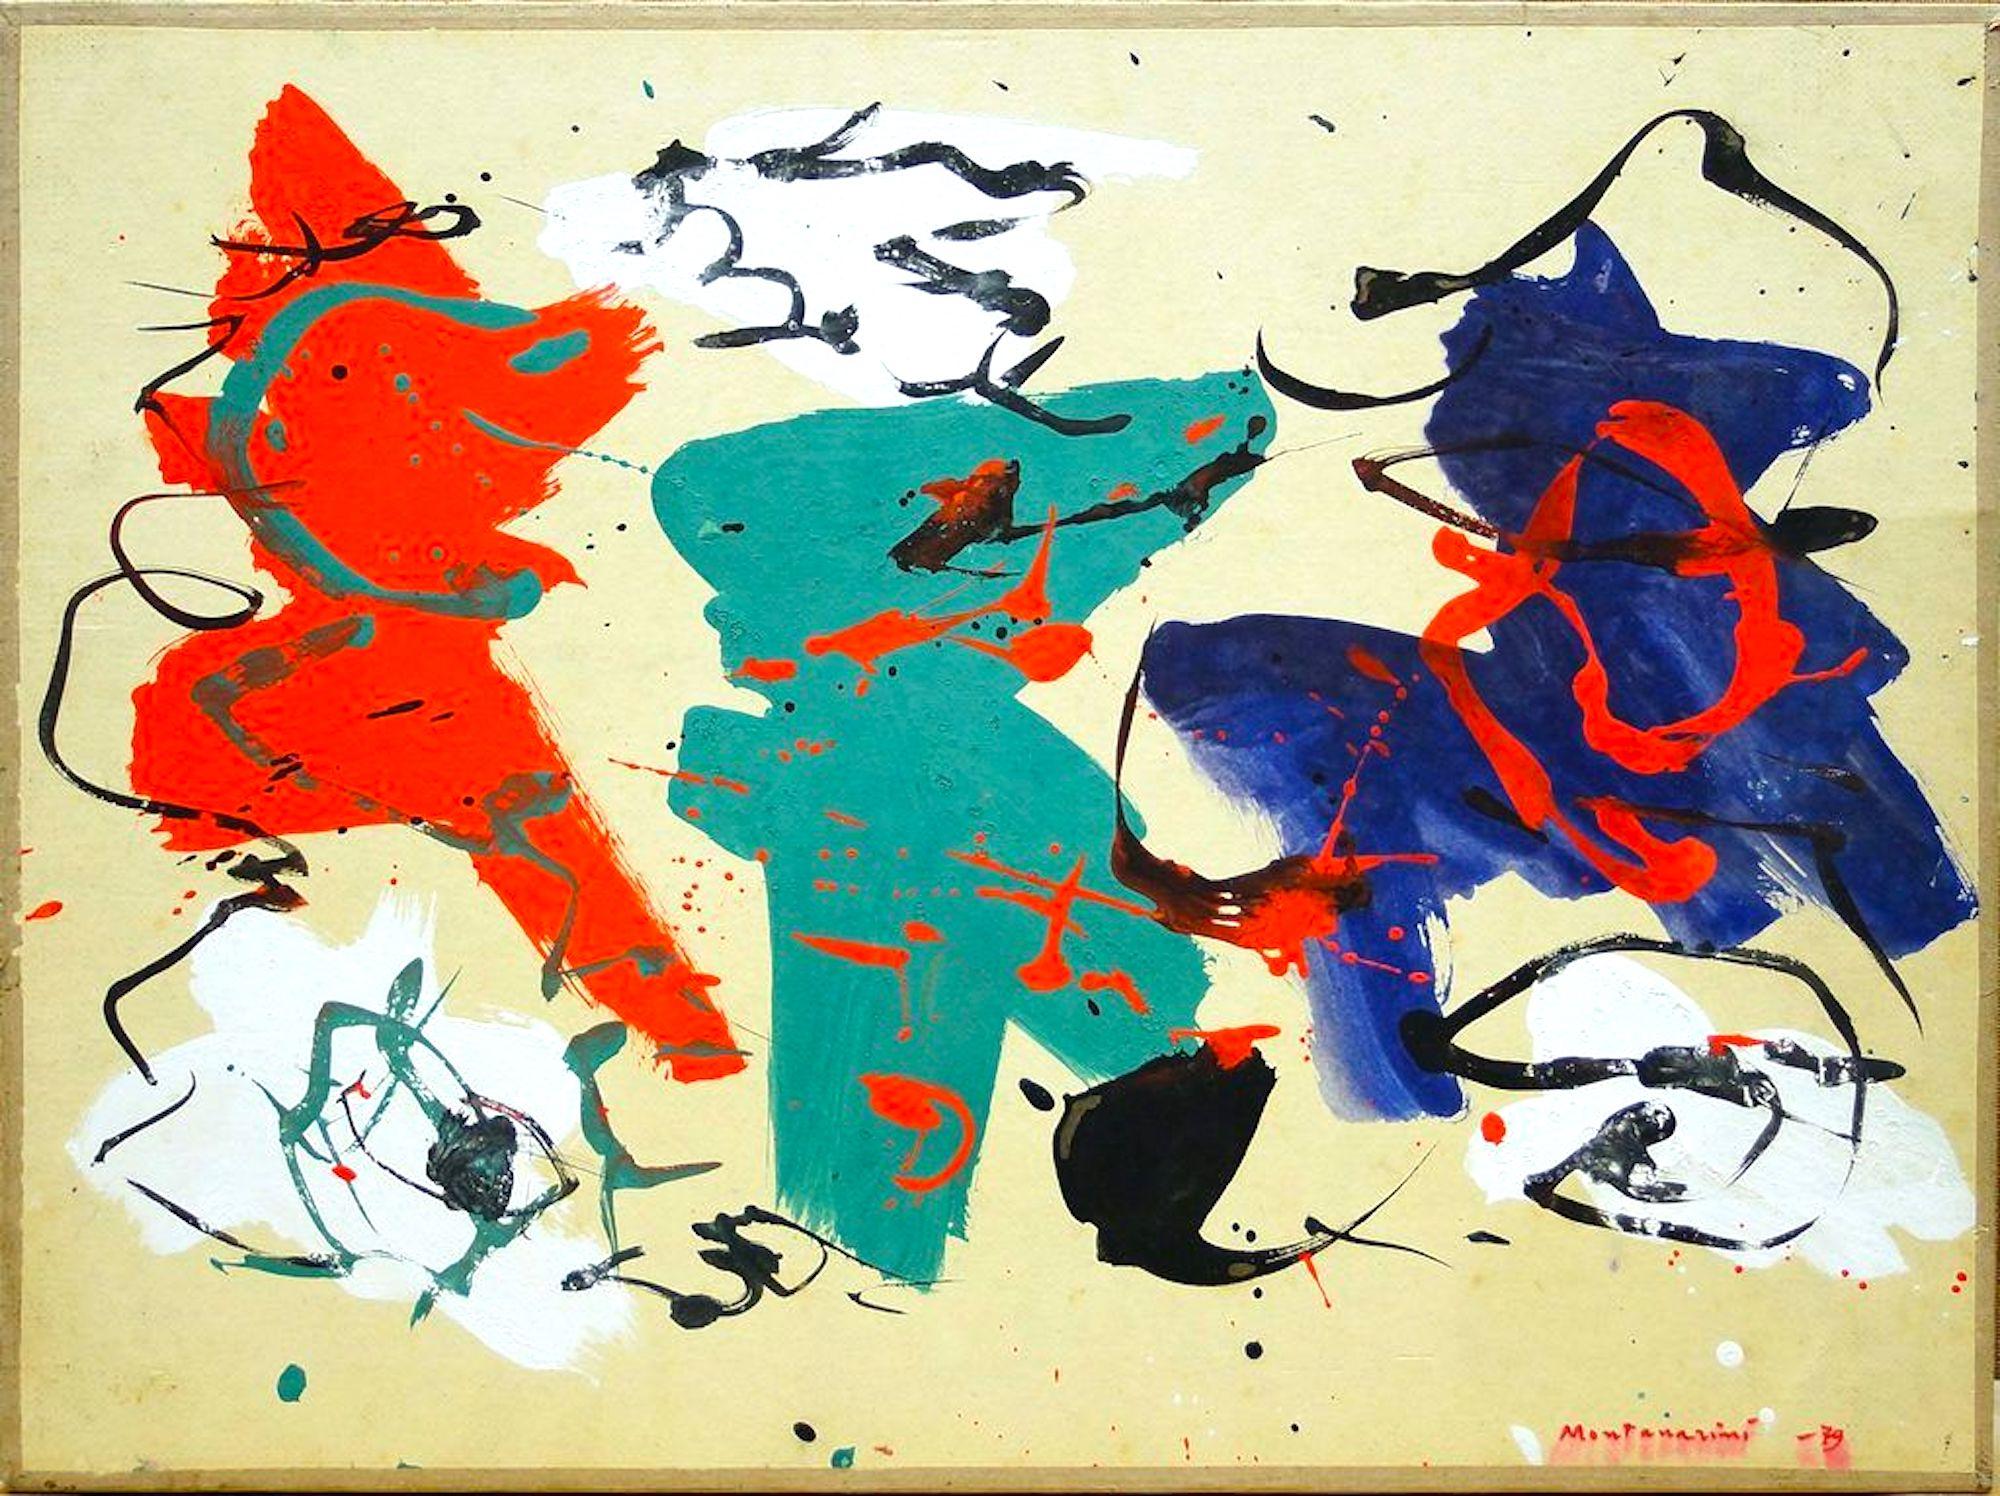 Abstract Composition realized with Tempera on Paper by Luigi Montanarini in 1979.

Very good conditions.

Luigi Montanarini (Florence, 1906 - Rome, 1998)
His artistic career started a little by chance when, in 1925, during one of his frequent visits